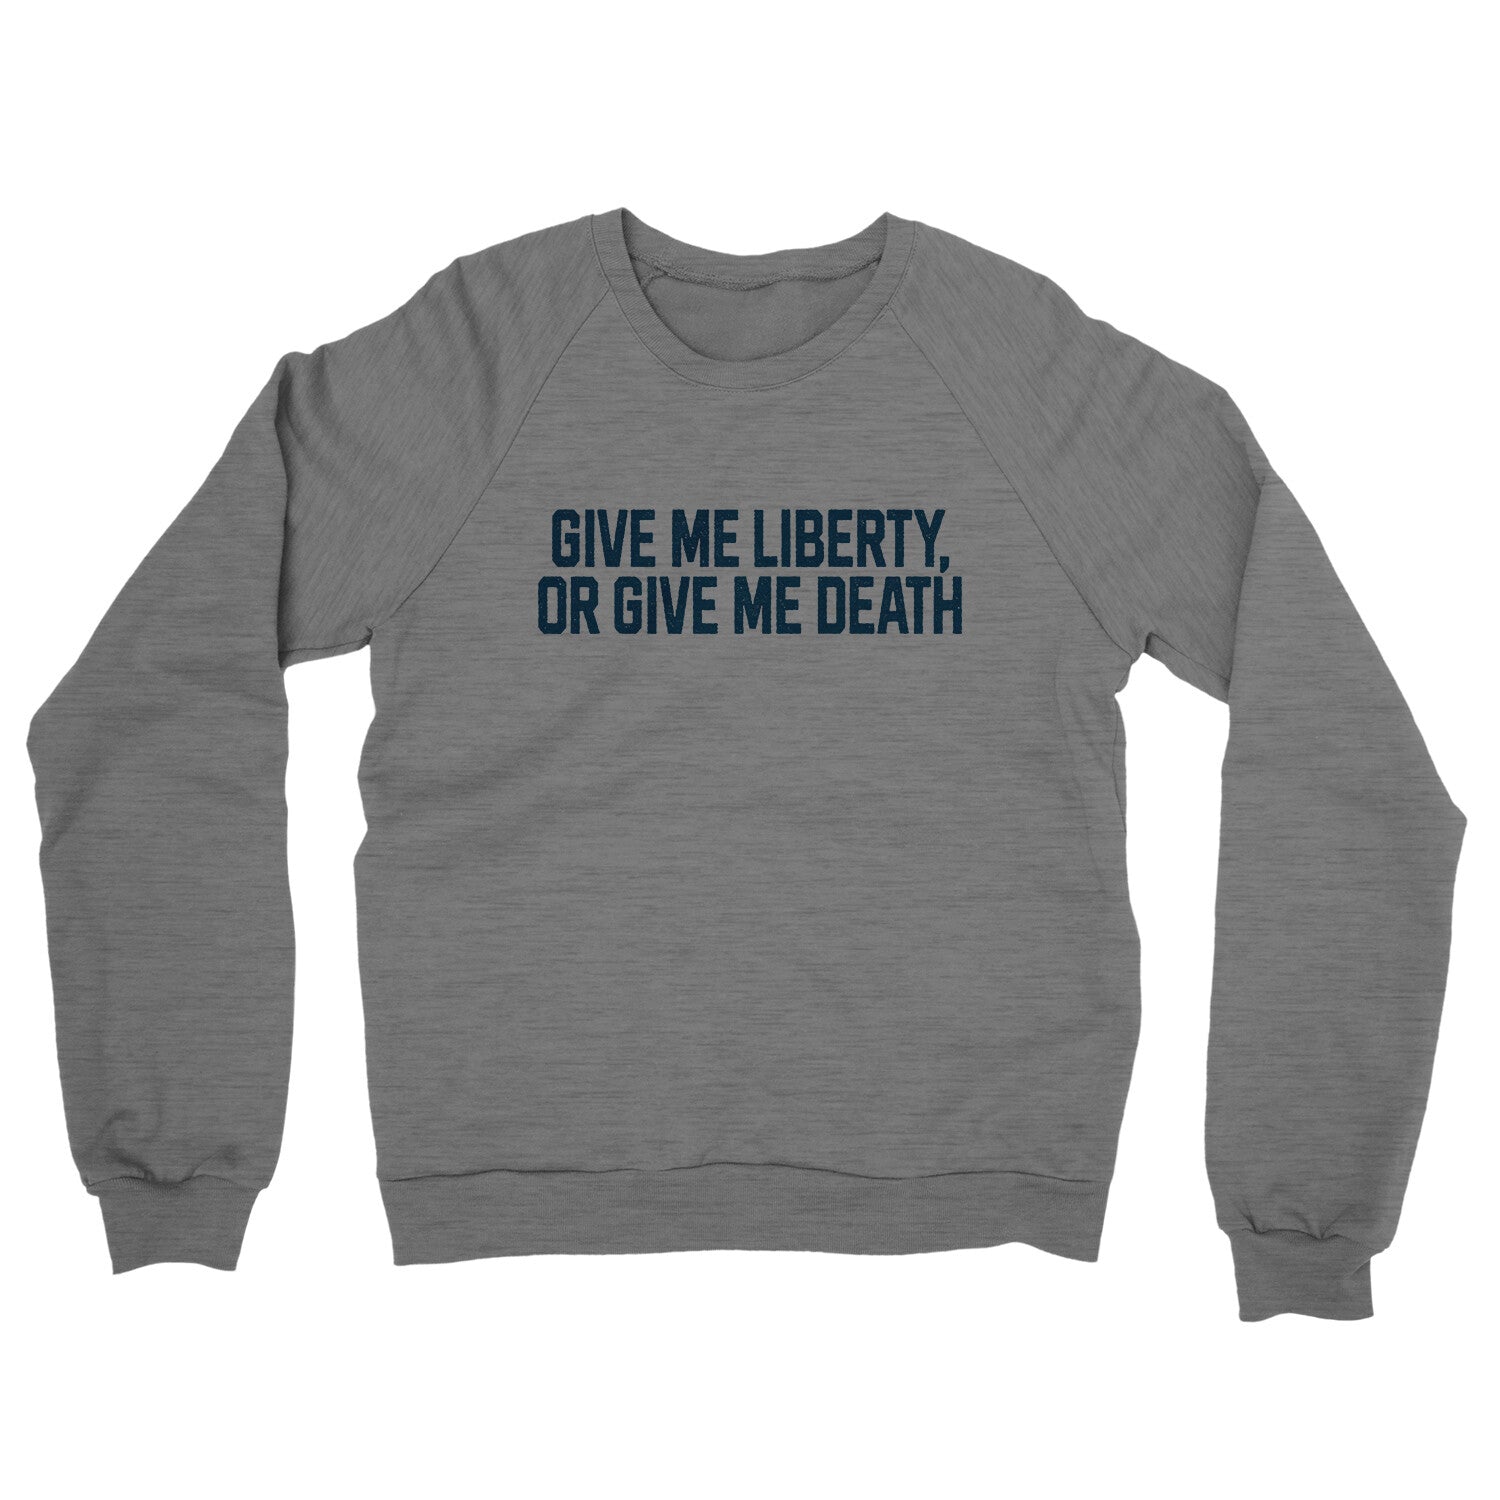 Give Me Liberty or Give Me Death in Graphite Heather Color